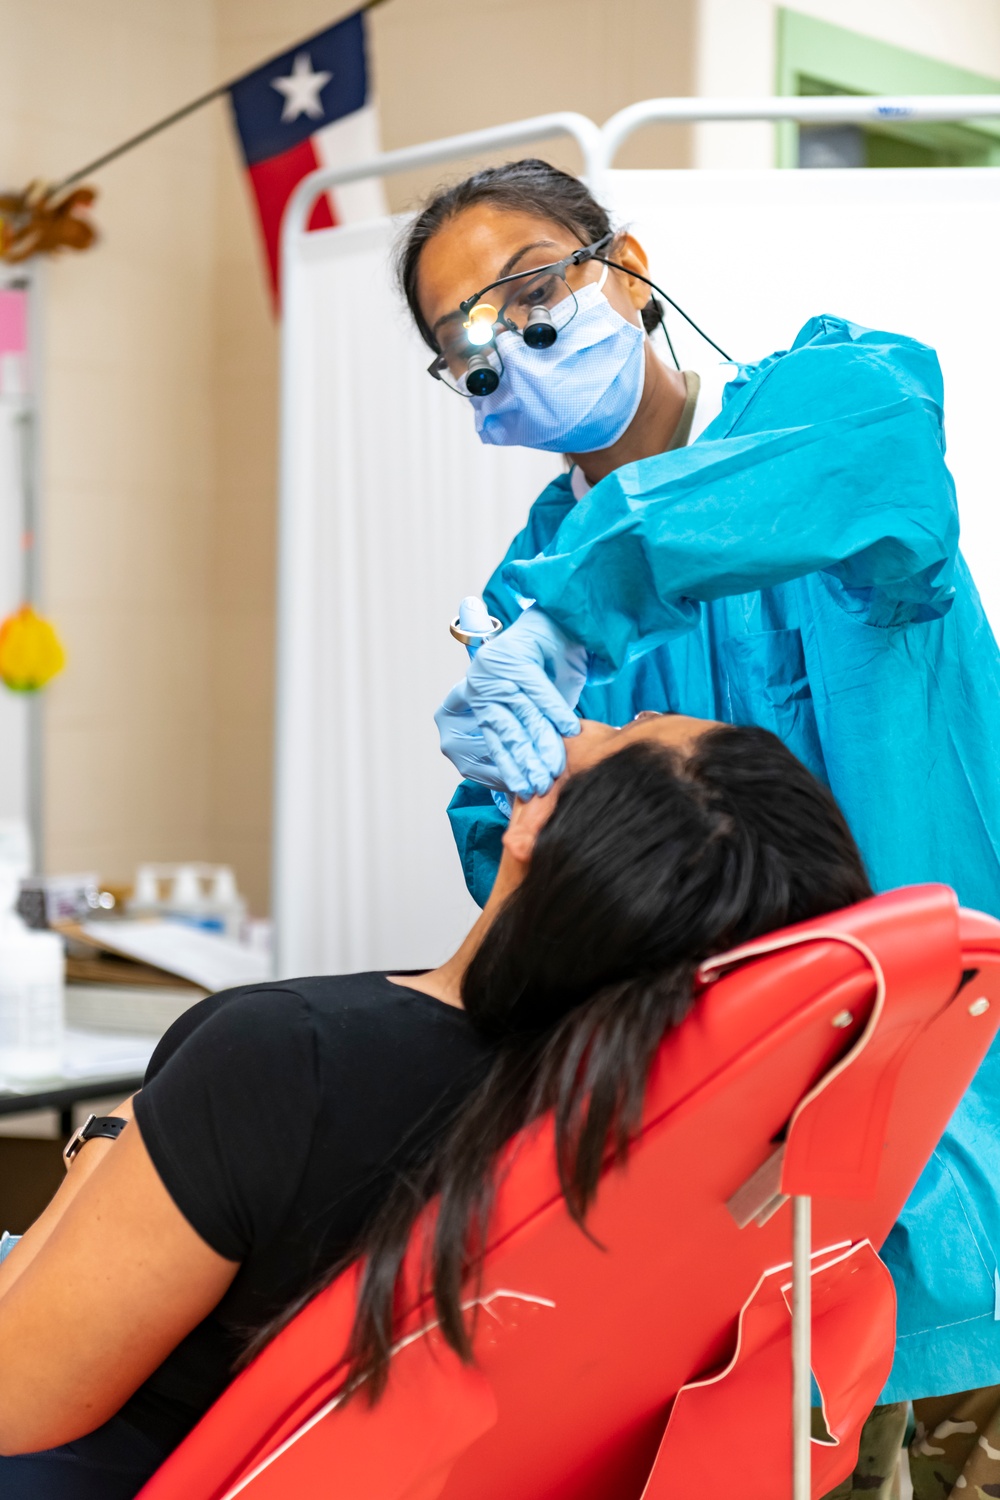 994th Dental Company Delivers No-Cost Dental Care to Nueces County as part of IRT Nueces